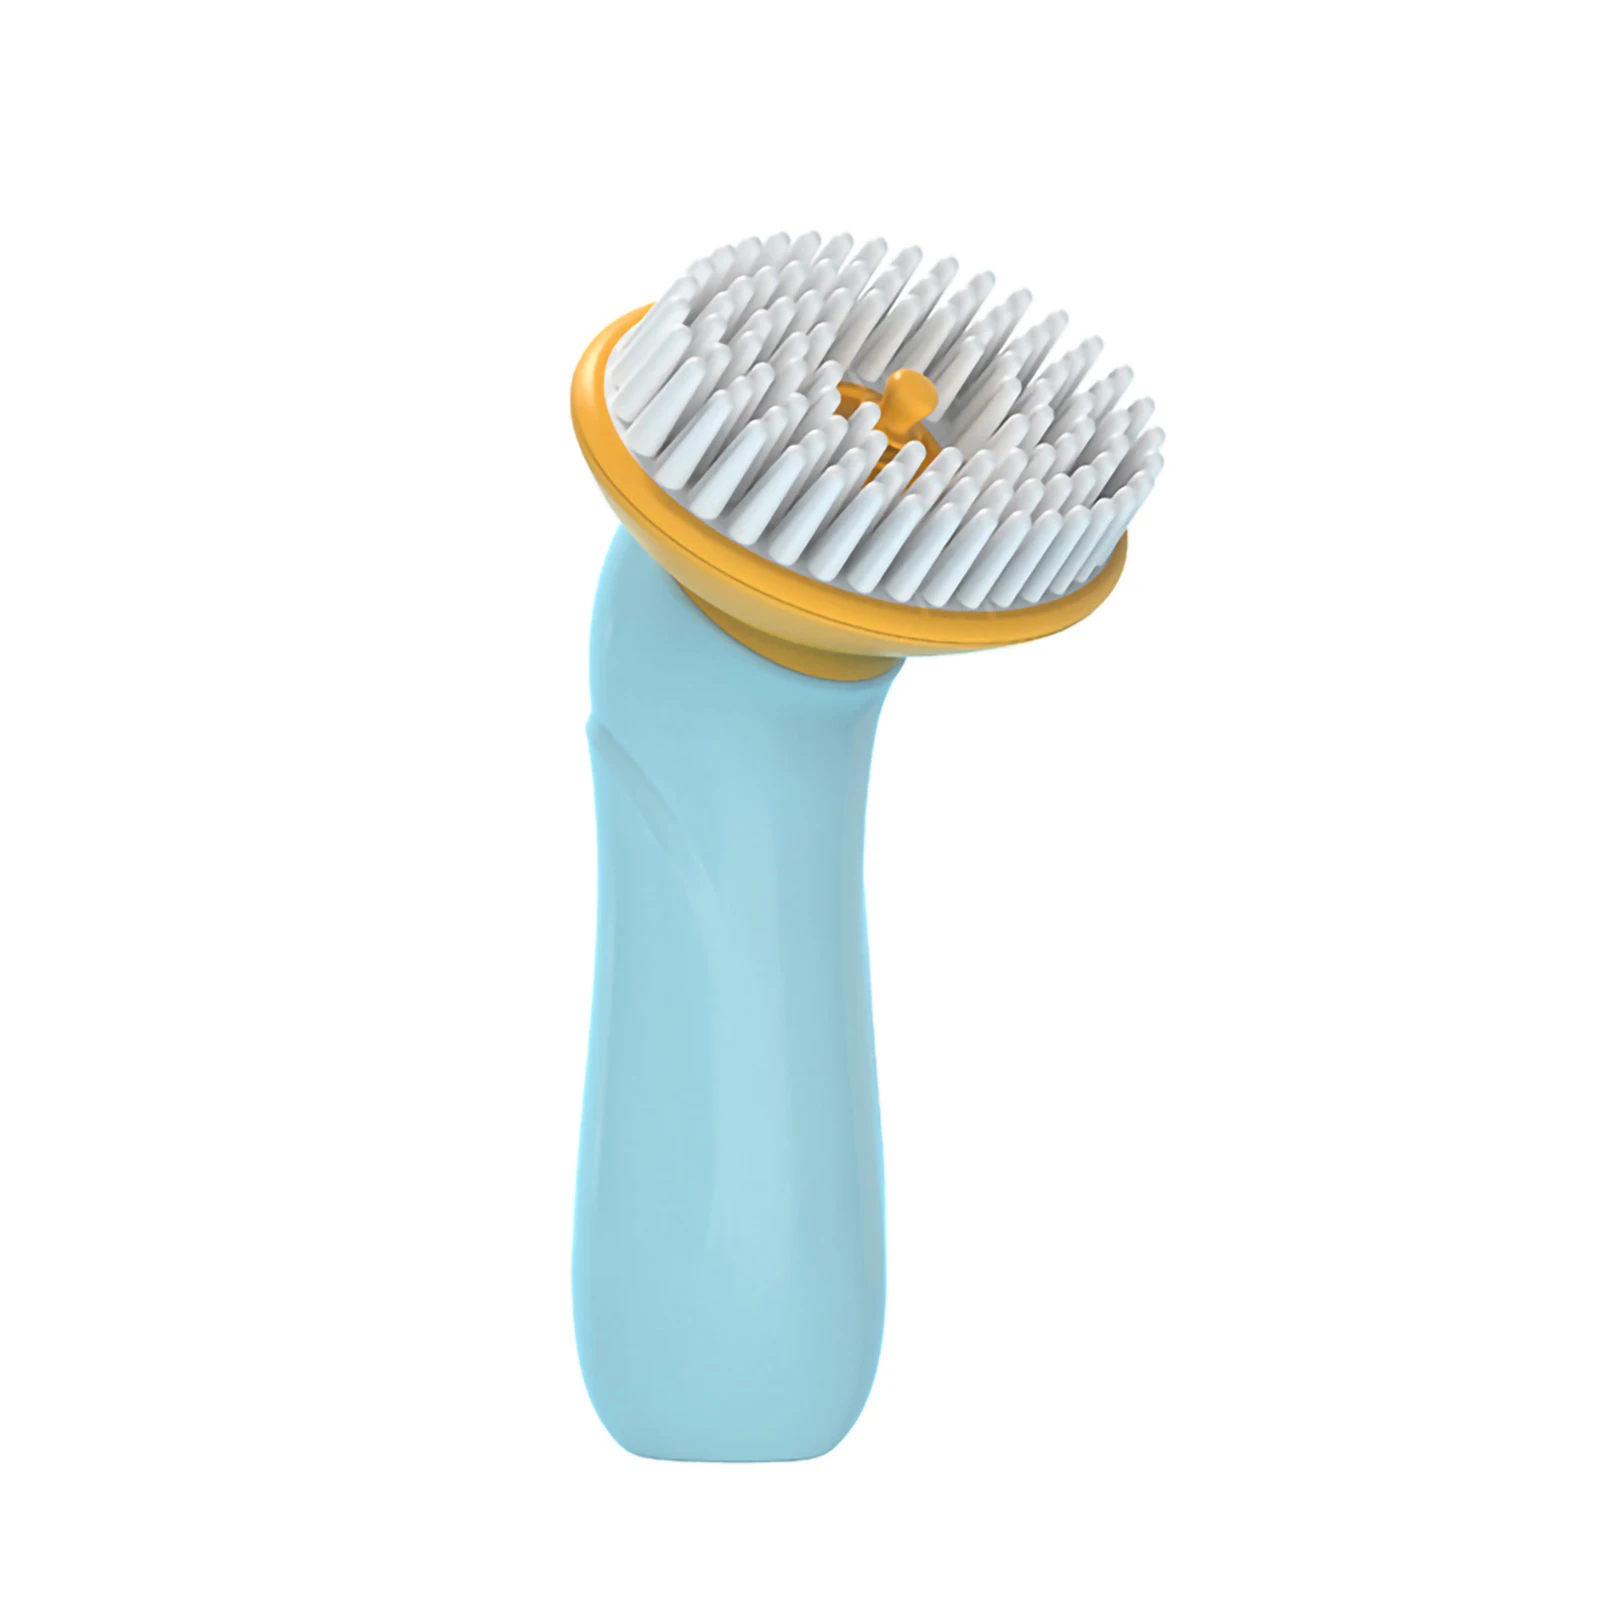 

Dog Bath Brush Pet Bath Massage Brush For Dogs And Cats Pet Grooming Deshedding Brushes Gently Removes Loose Undercoat Hairs